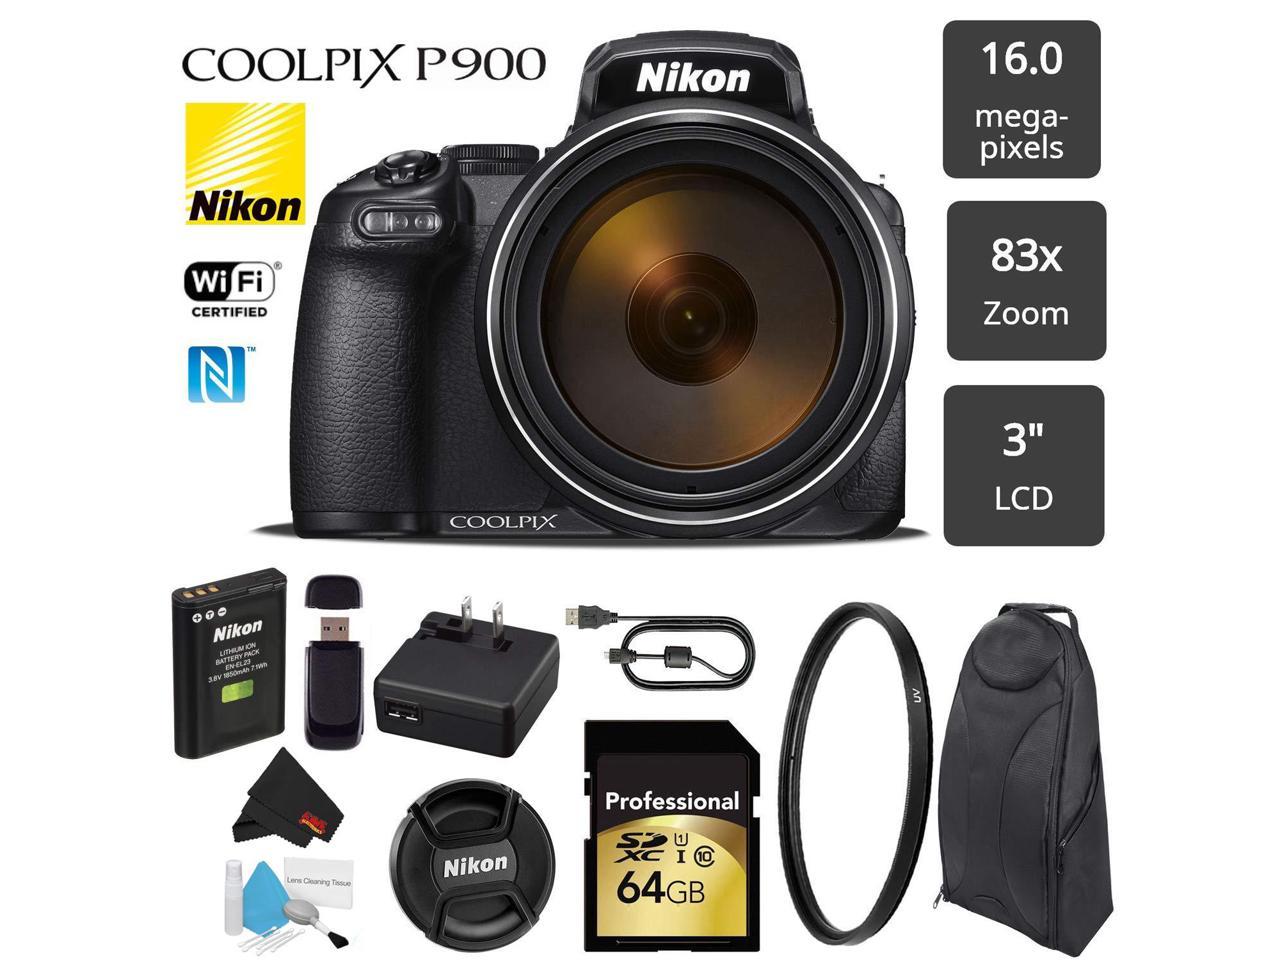 Nikon COOLPIX P900 Camera 16MP 83x Optical Zoom & Built-in Wi-Fi + UV Protection Filter + Cotton Swabs - (Intl Model) - Newegg.com